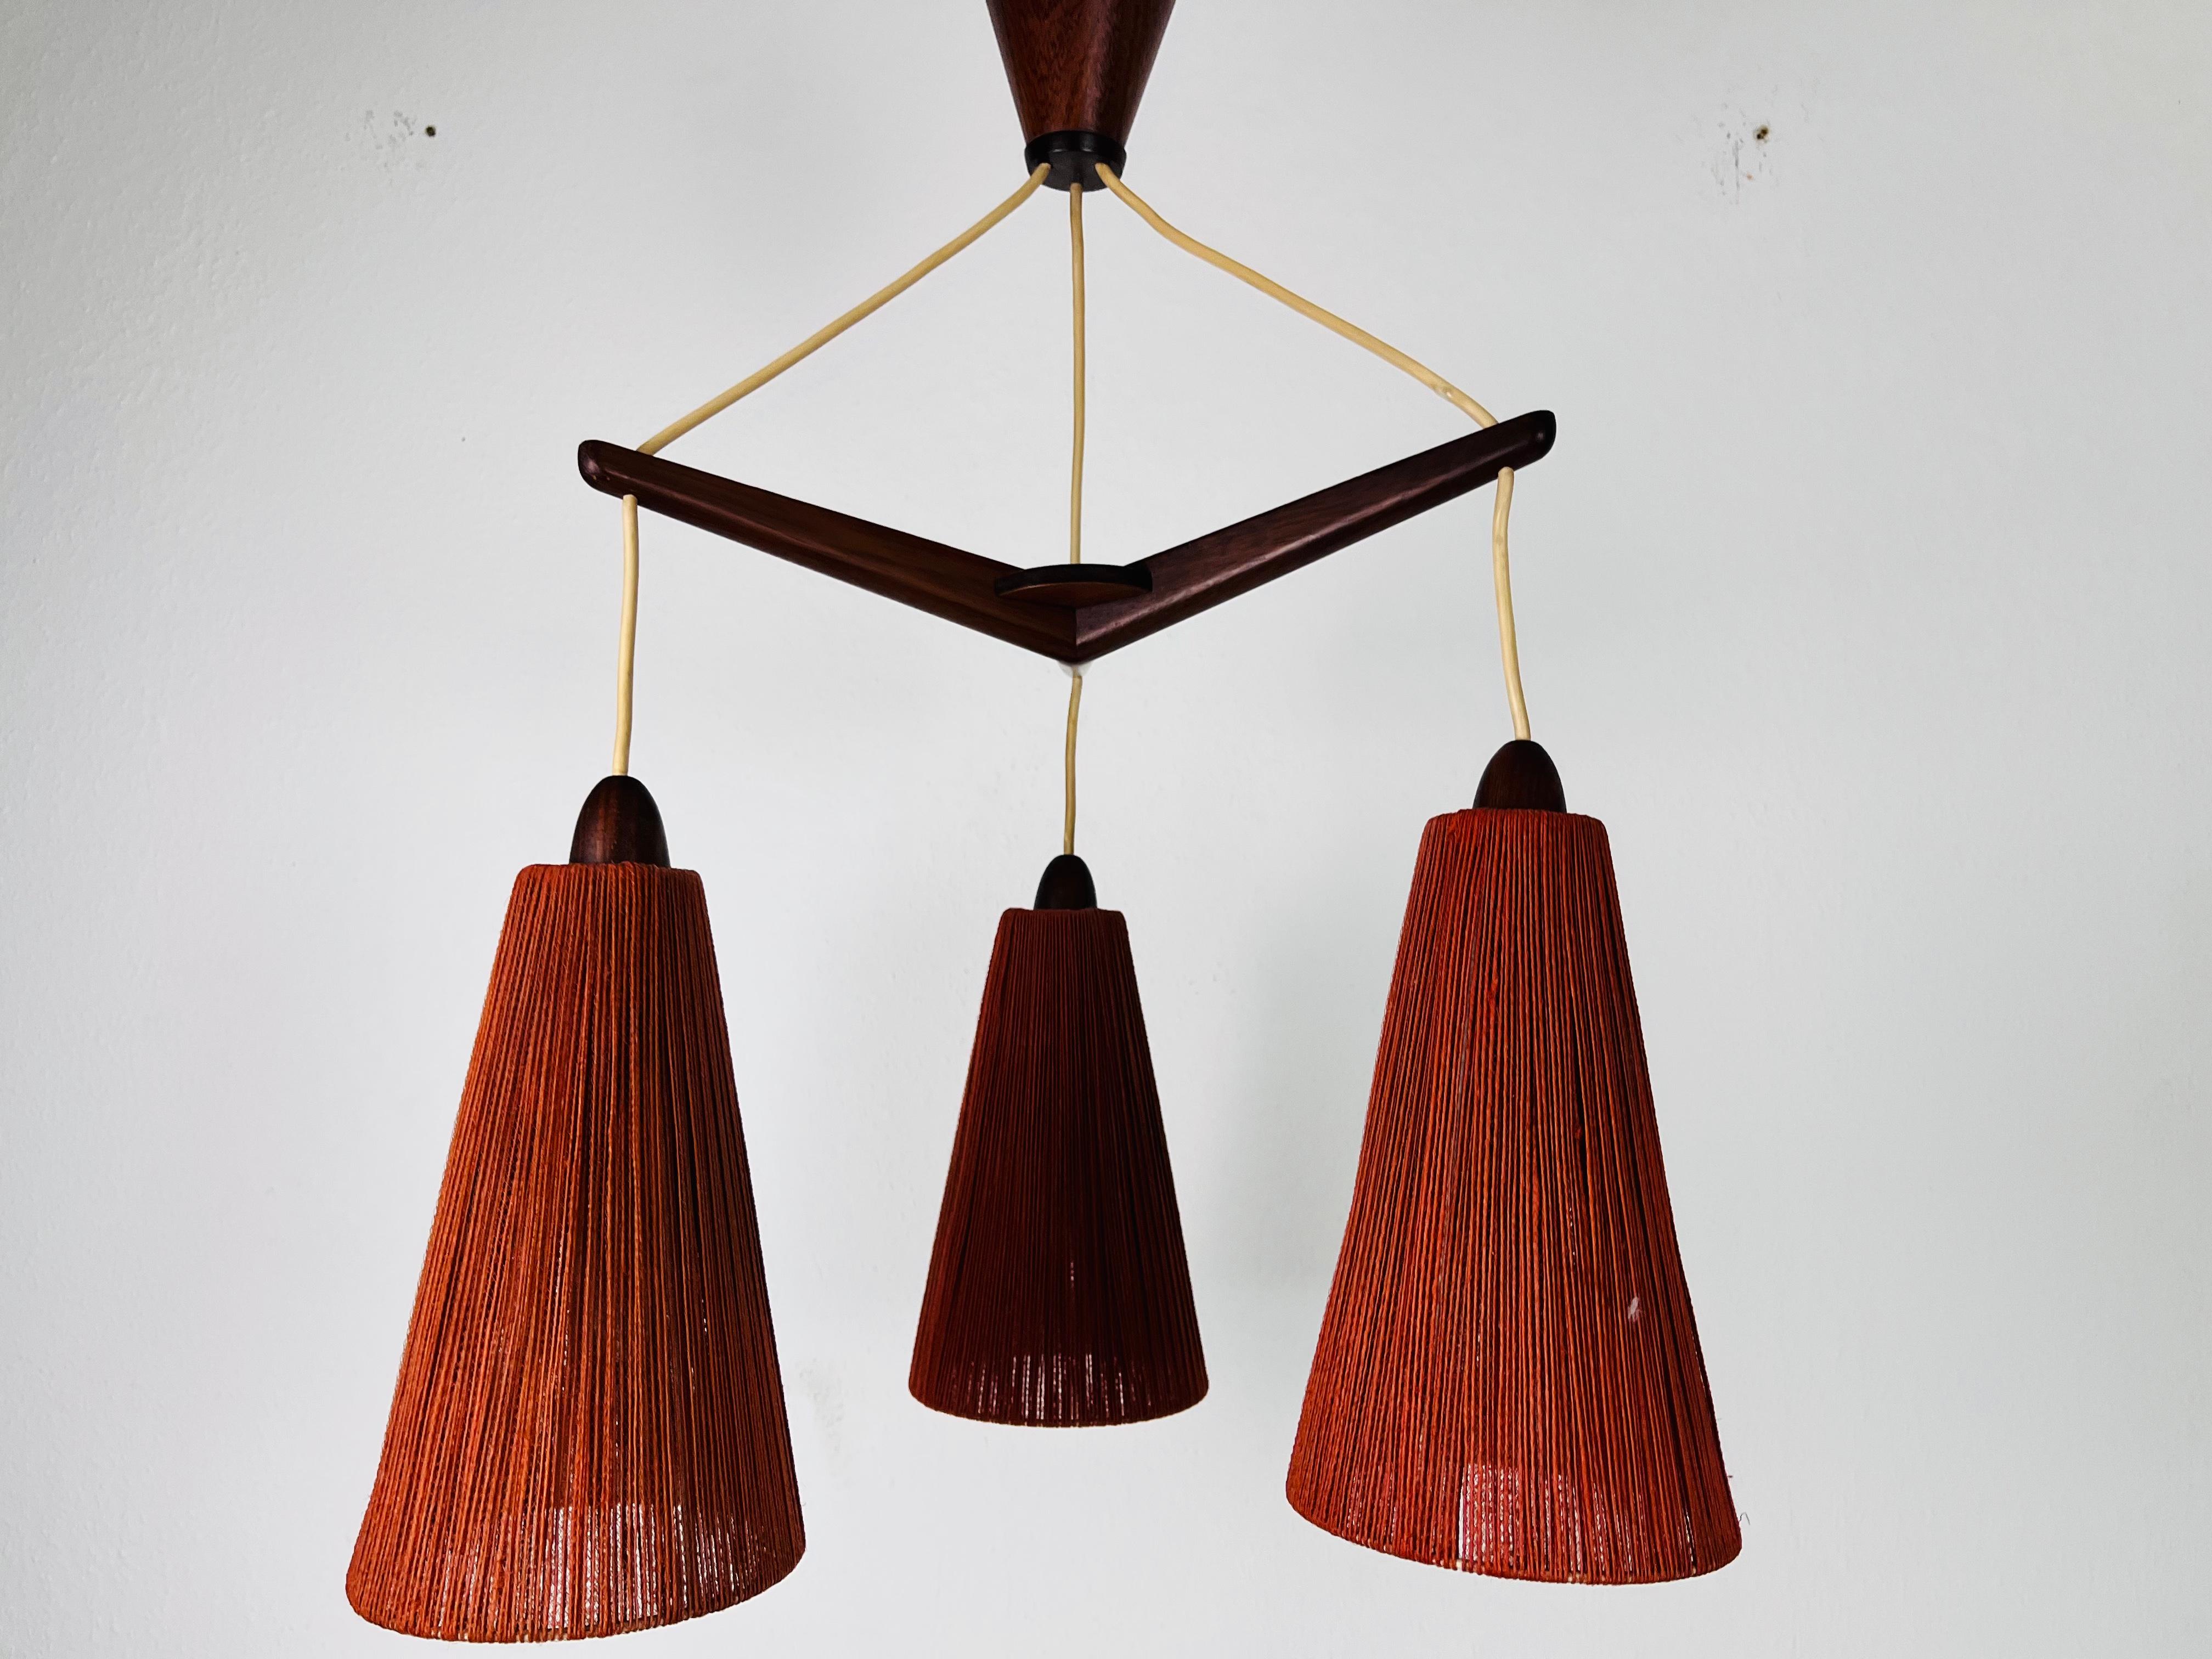 Rattan Midcentury Teak and Cord Shade Hanging Lamp by Temde, circa 1960 For Sale